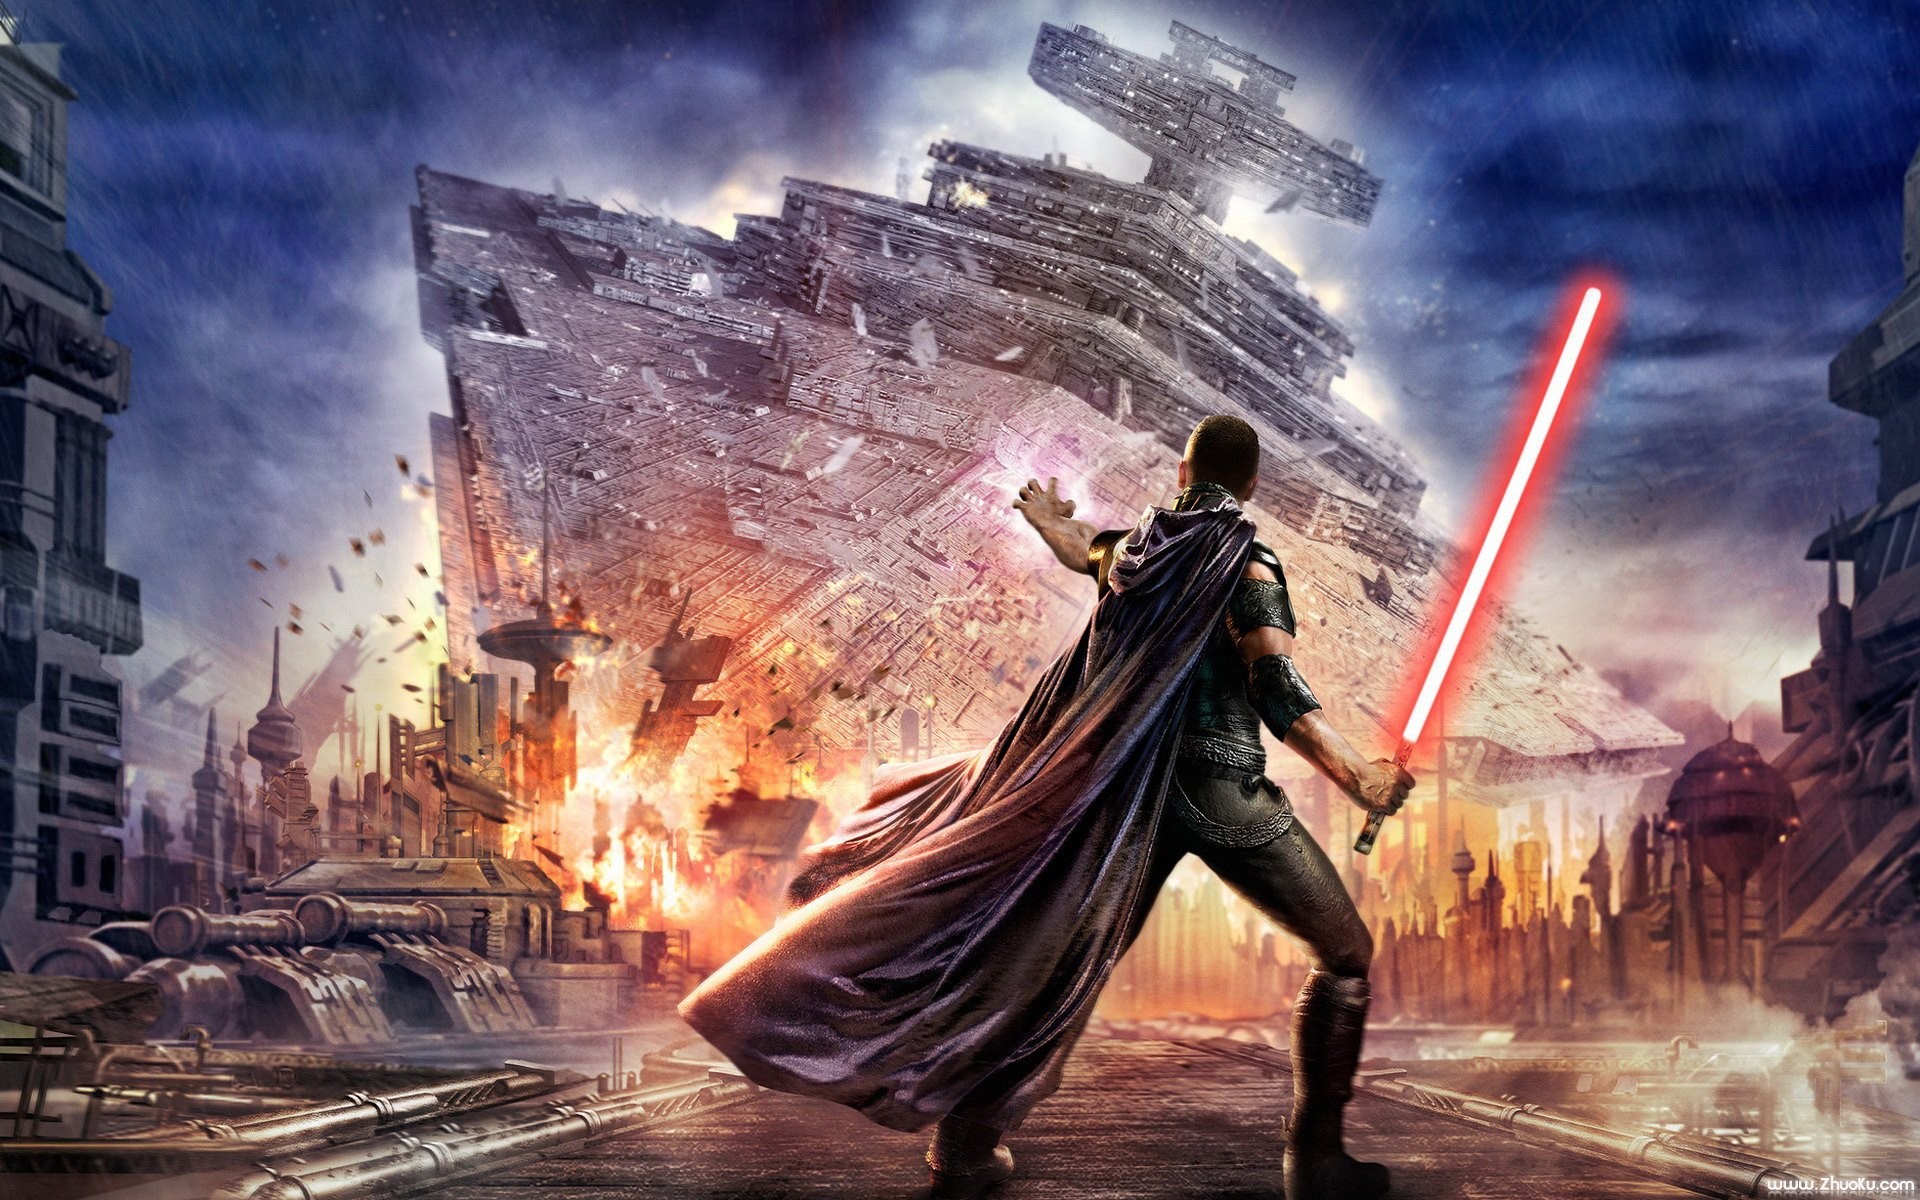 Star Wars Games Wallpapers #16 - 1920x1200